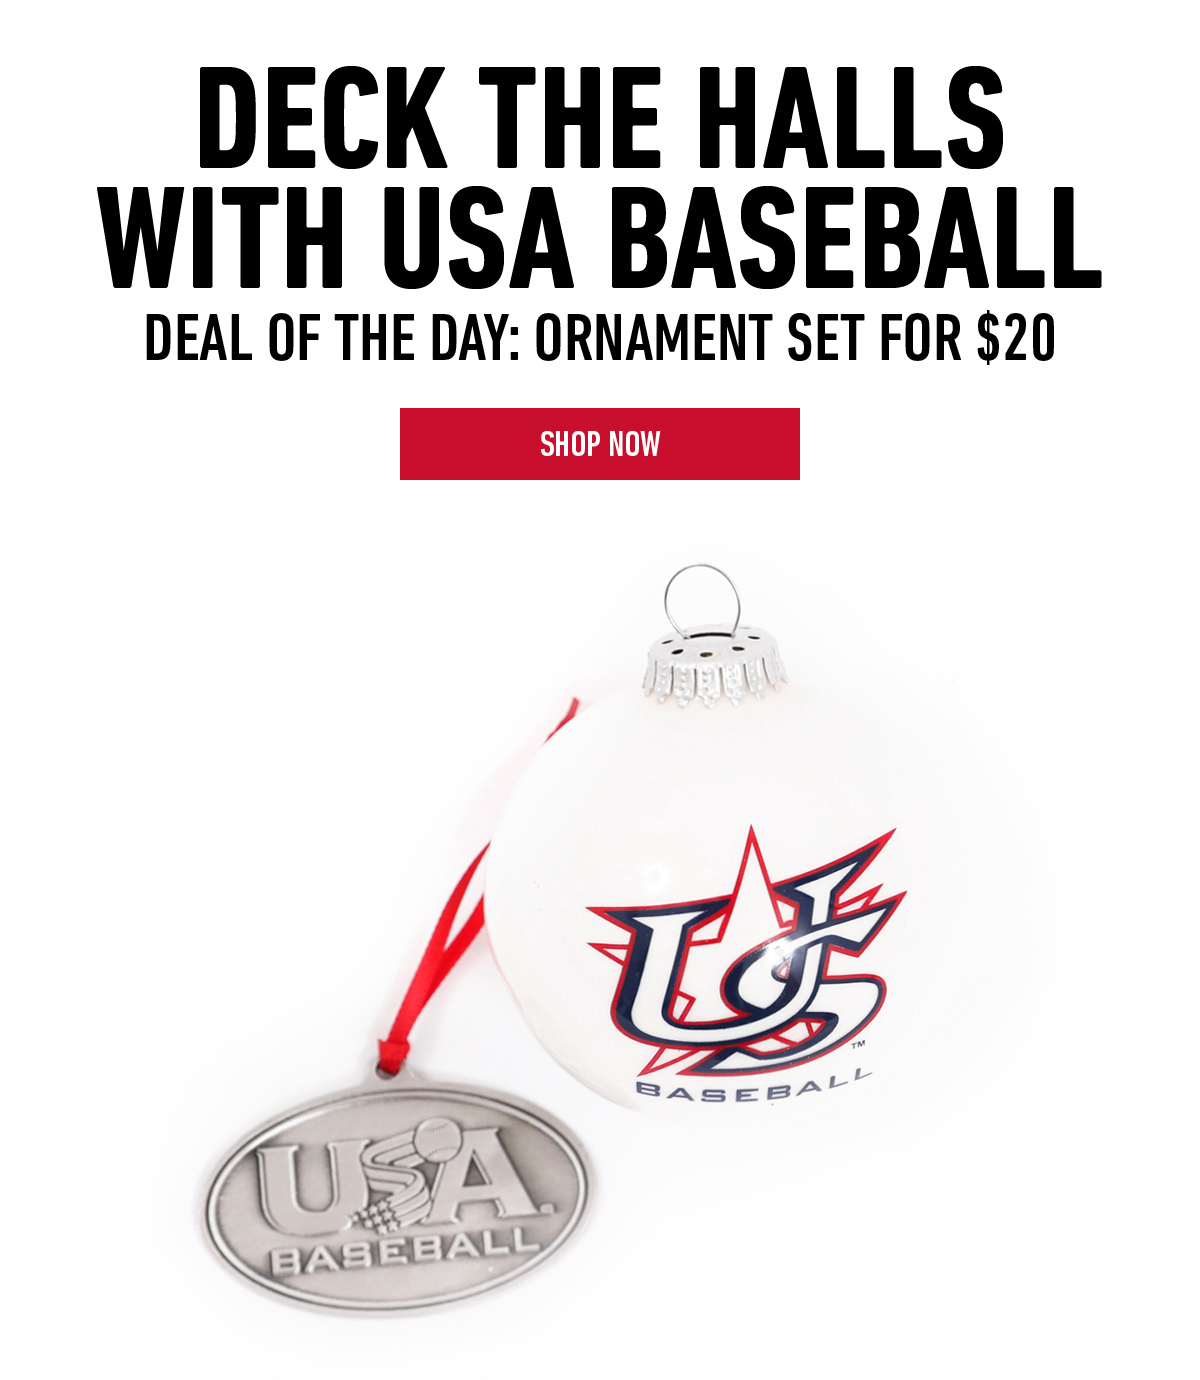 USA Baseball Ornament Deal of the Day